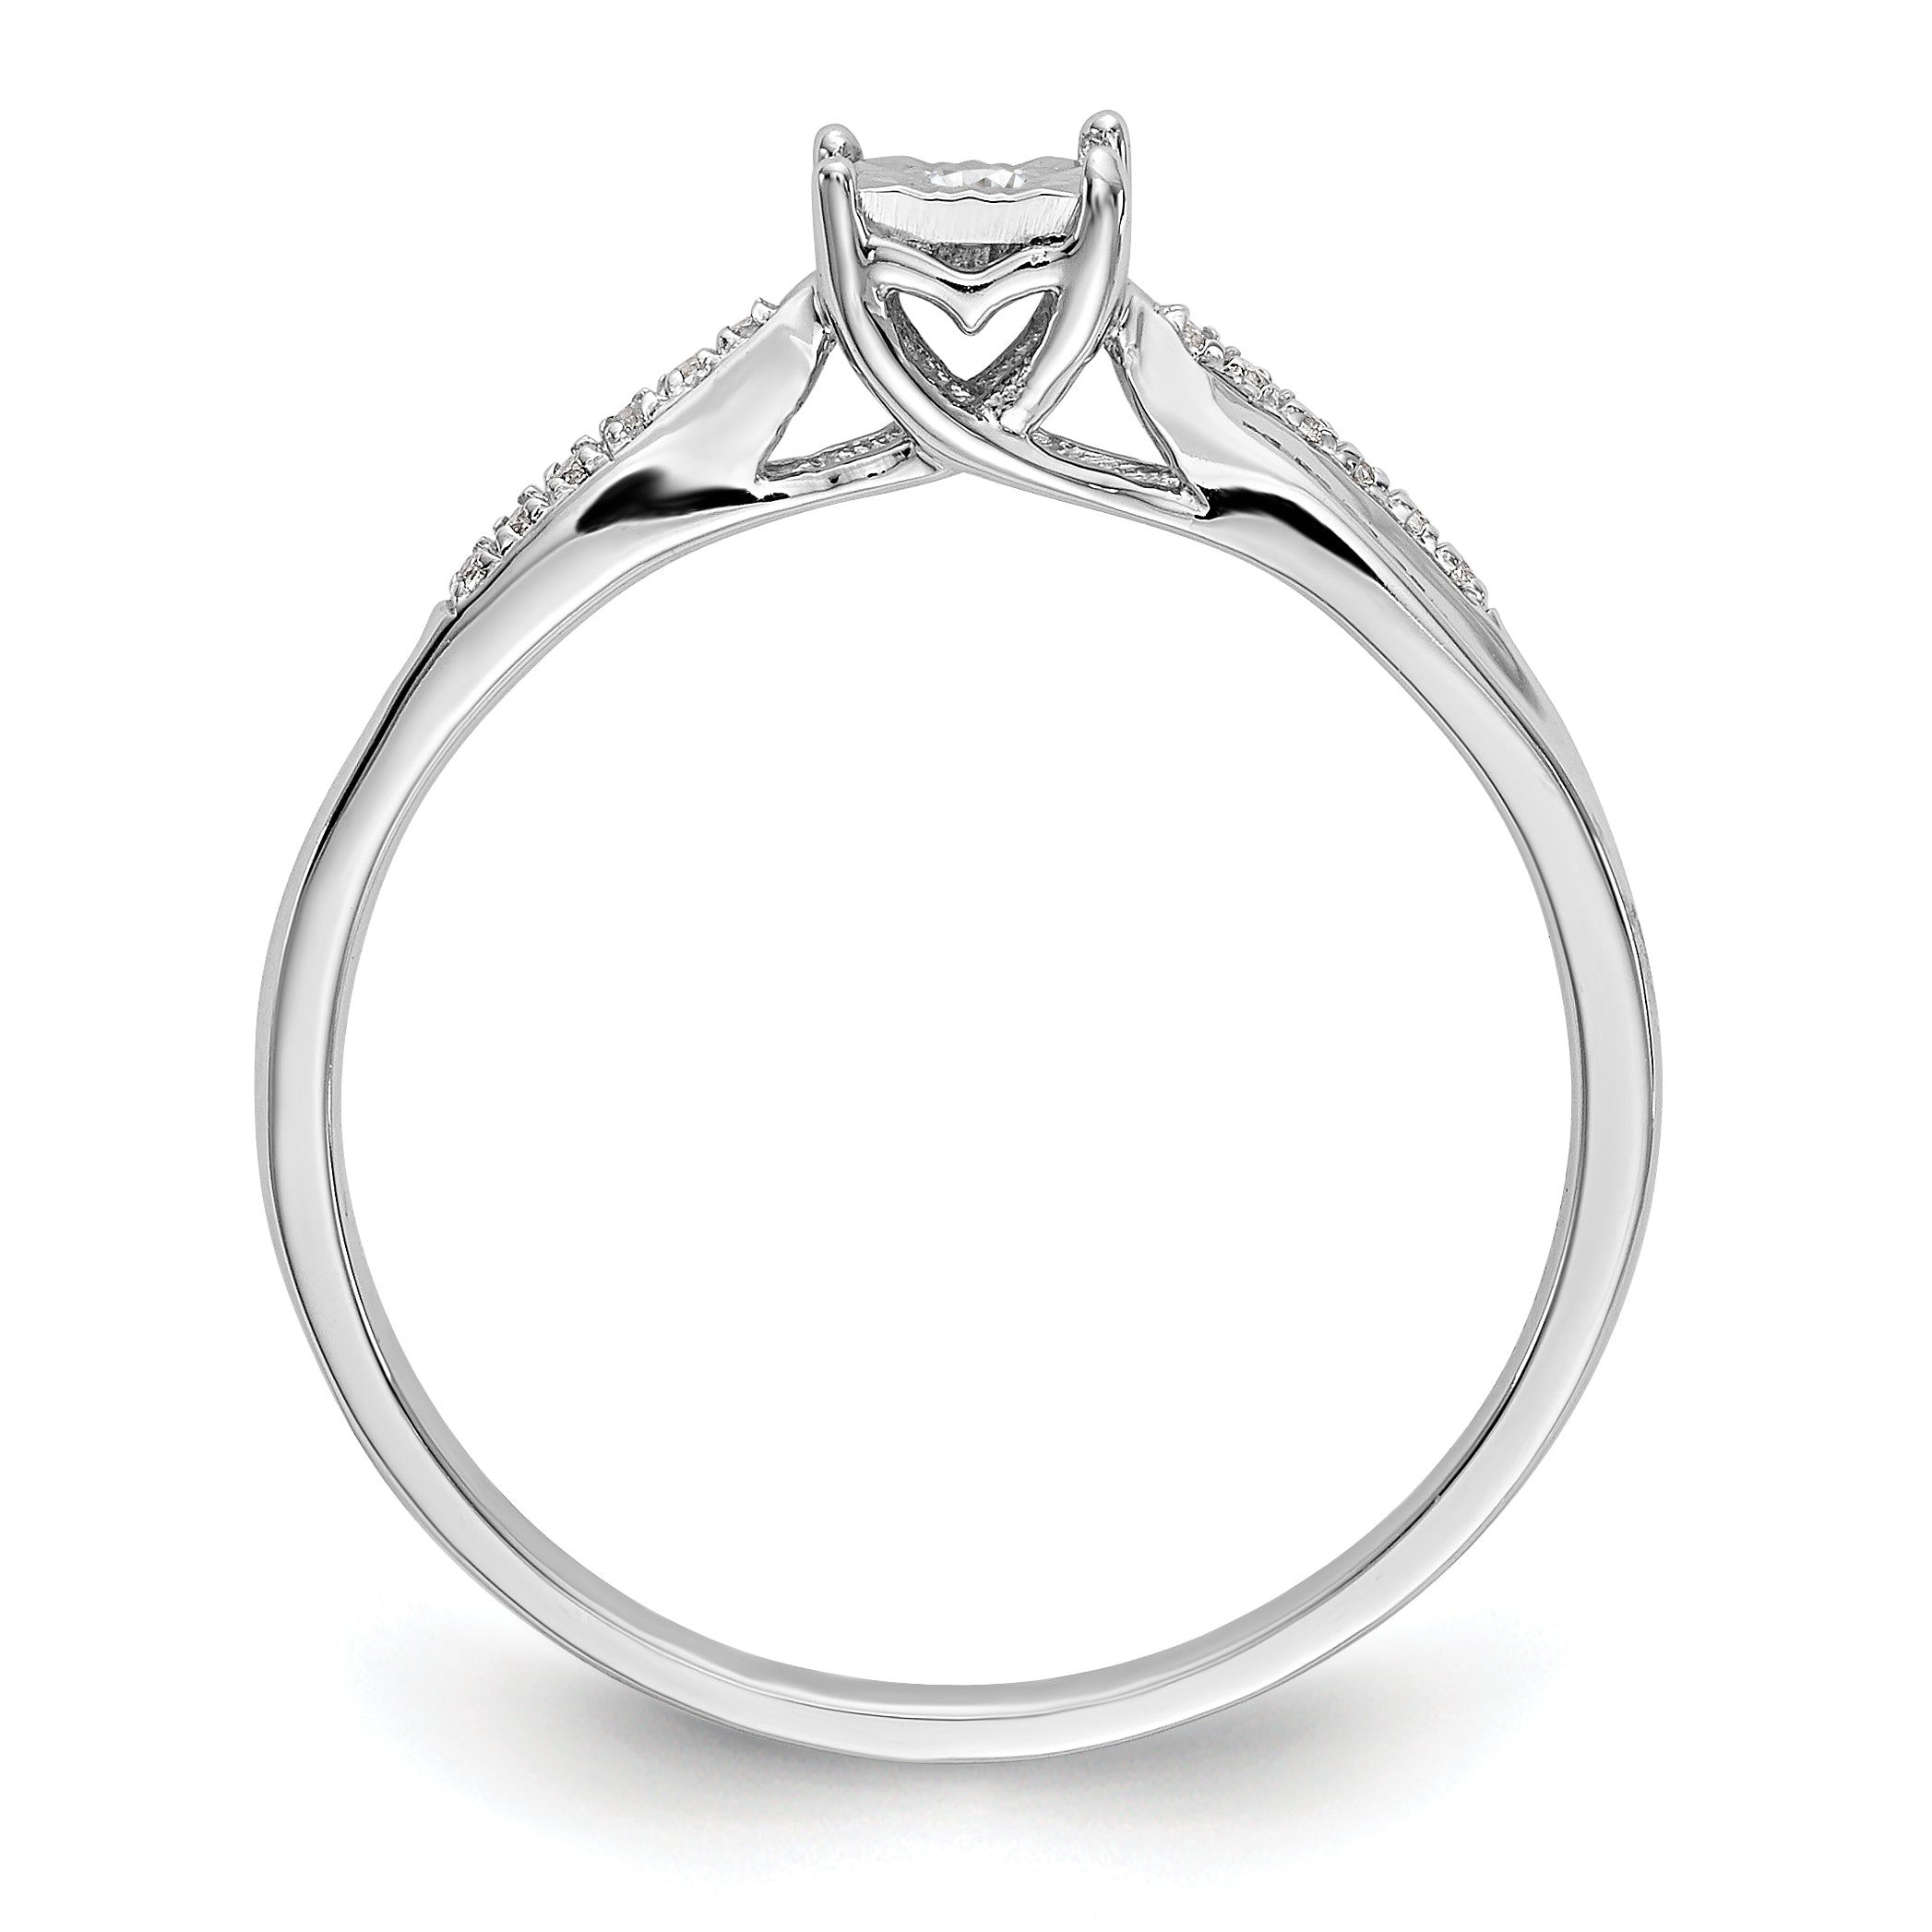 First Promise 14K White Gold Square Illusion 1/20 carat Round Diamond Complete Promise/Engagement Ring